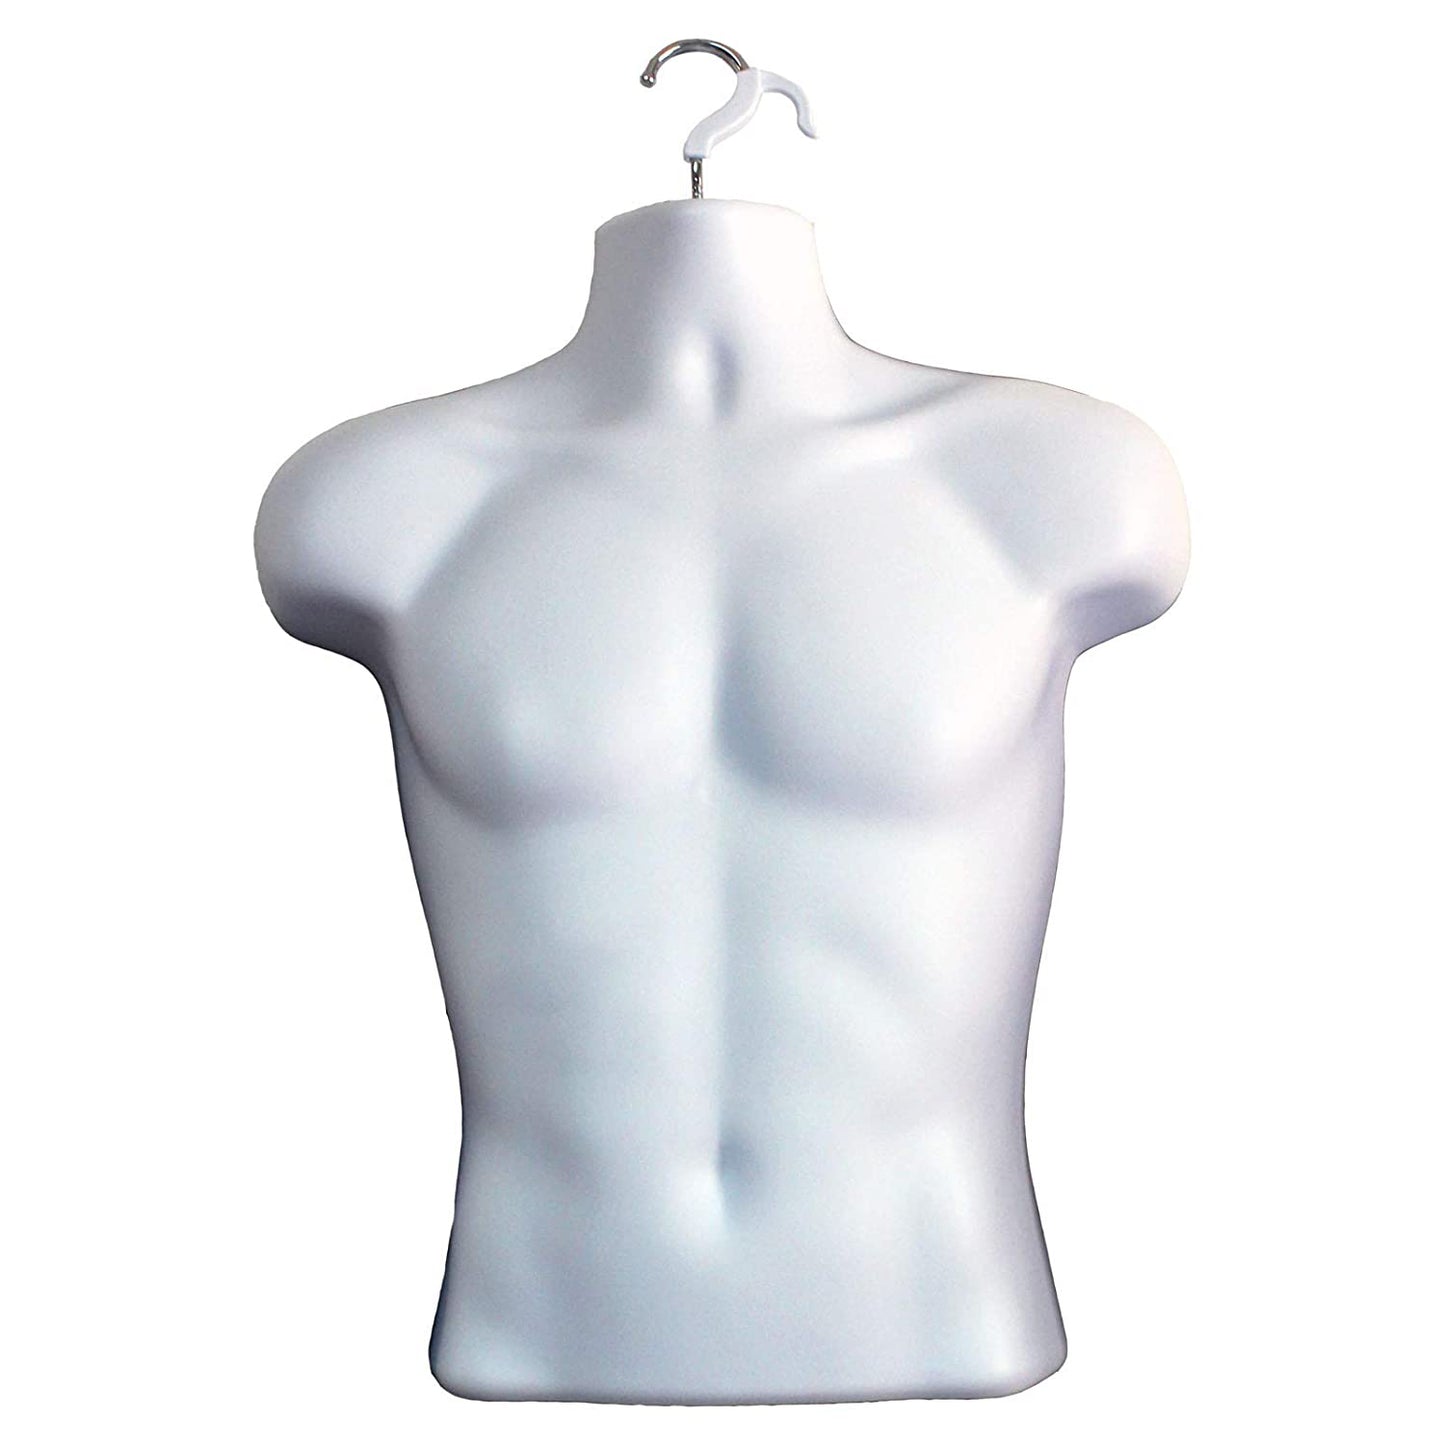 DisplayTown Mannequin Forms Male and Female Torso with Metal Stand and Hook for Hanging Pants, Waist Long, White